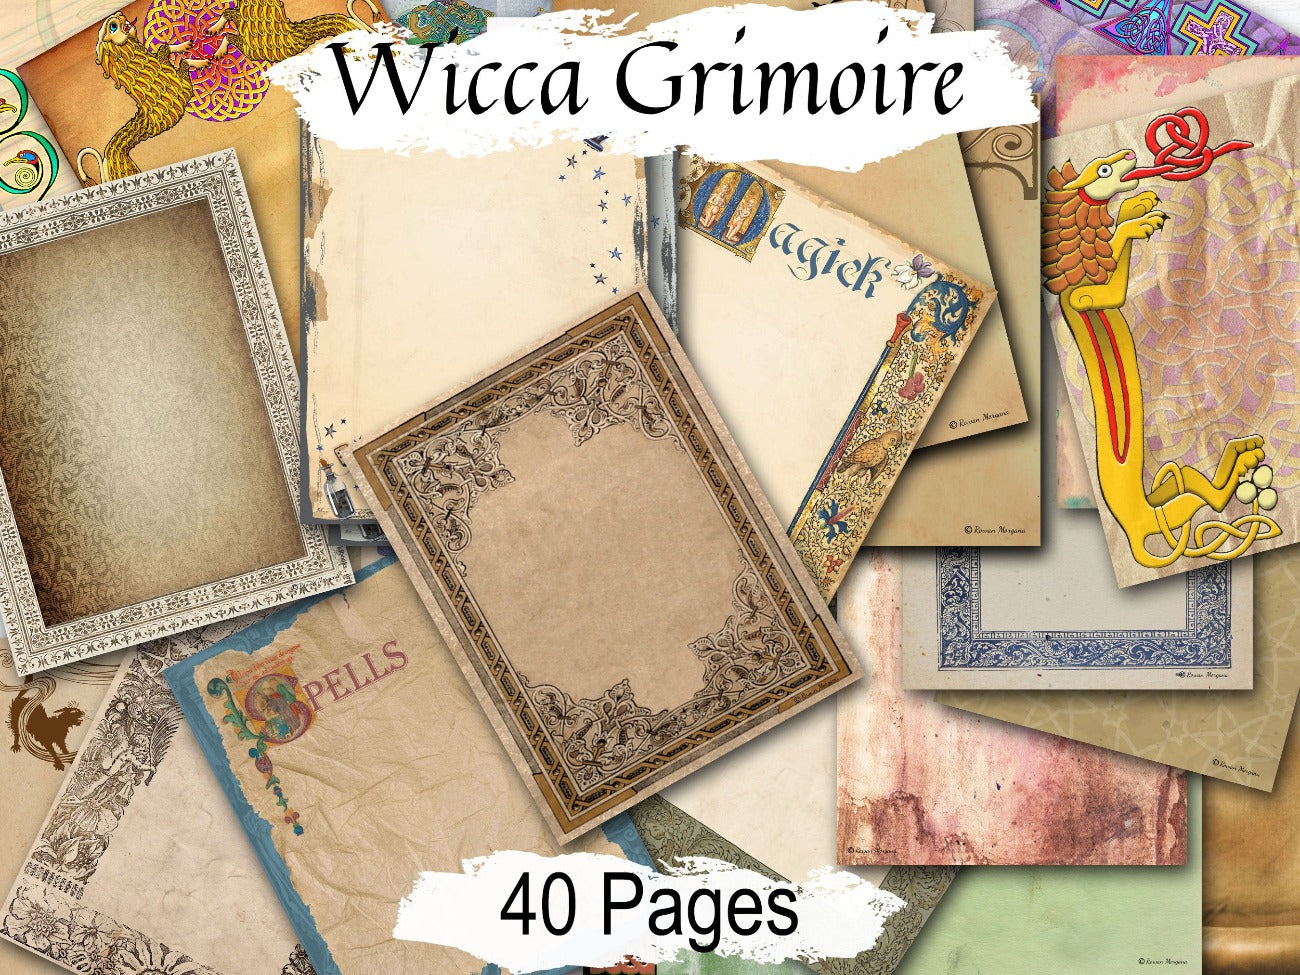 WICCA GRIMOIRE JOURNAL 40 Blank Pages, Witchcraft Book of Shadows Junk Journal Kit, Ornate Pagan Printable Witch Stationary, Old Book Pages - Morgana Magick Spell